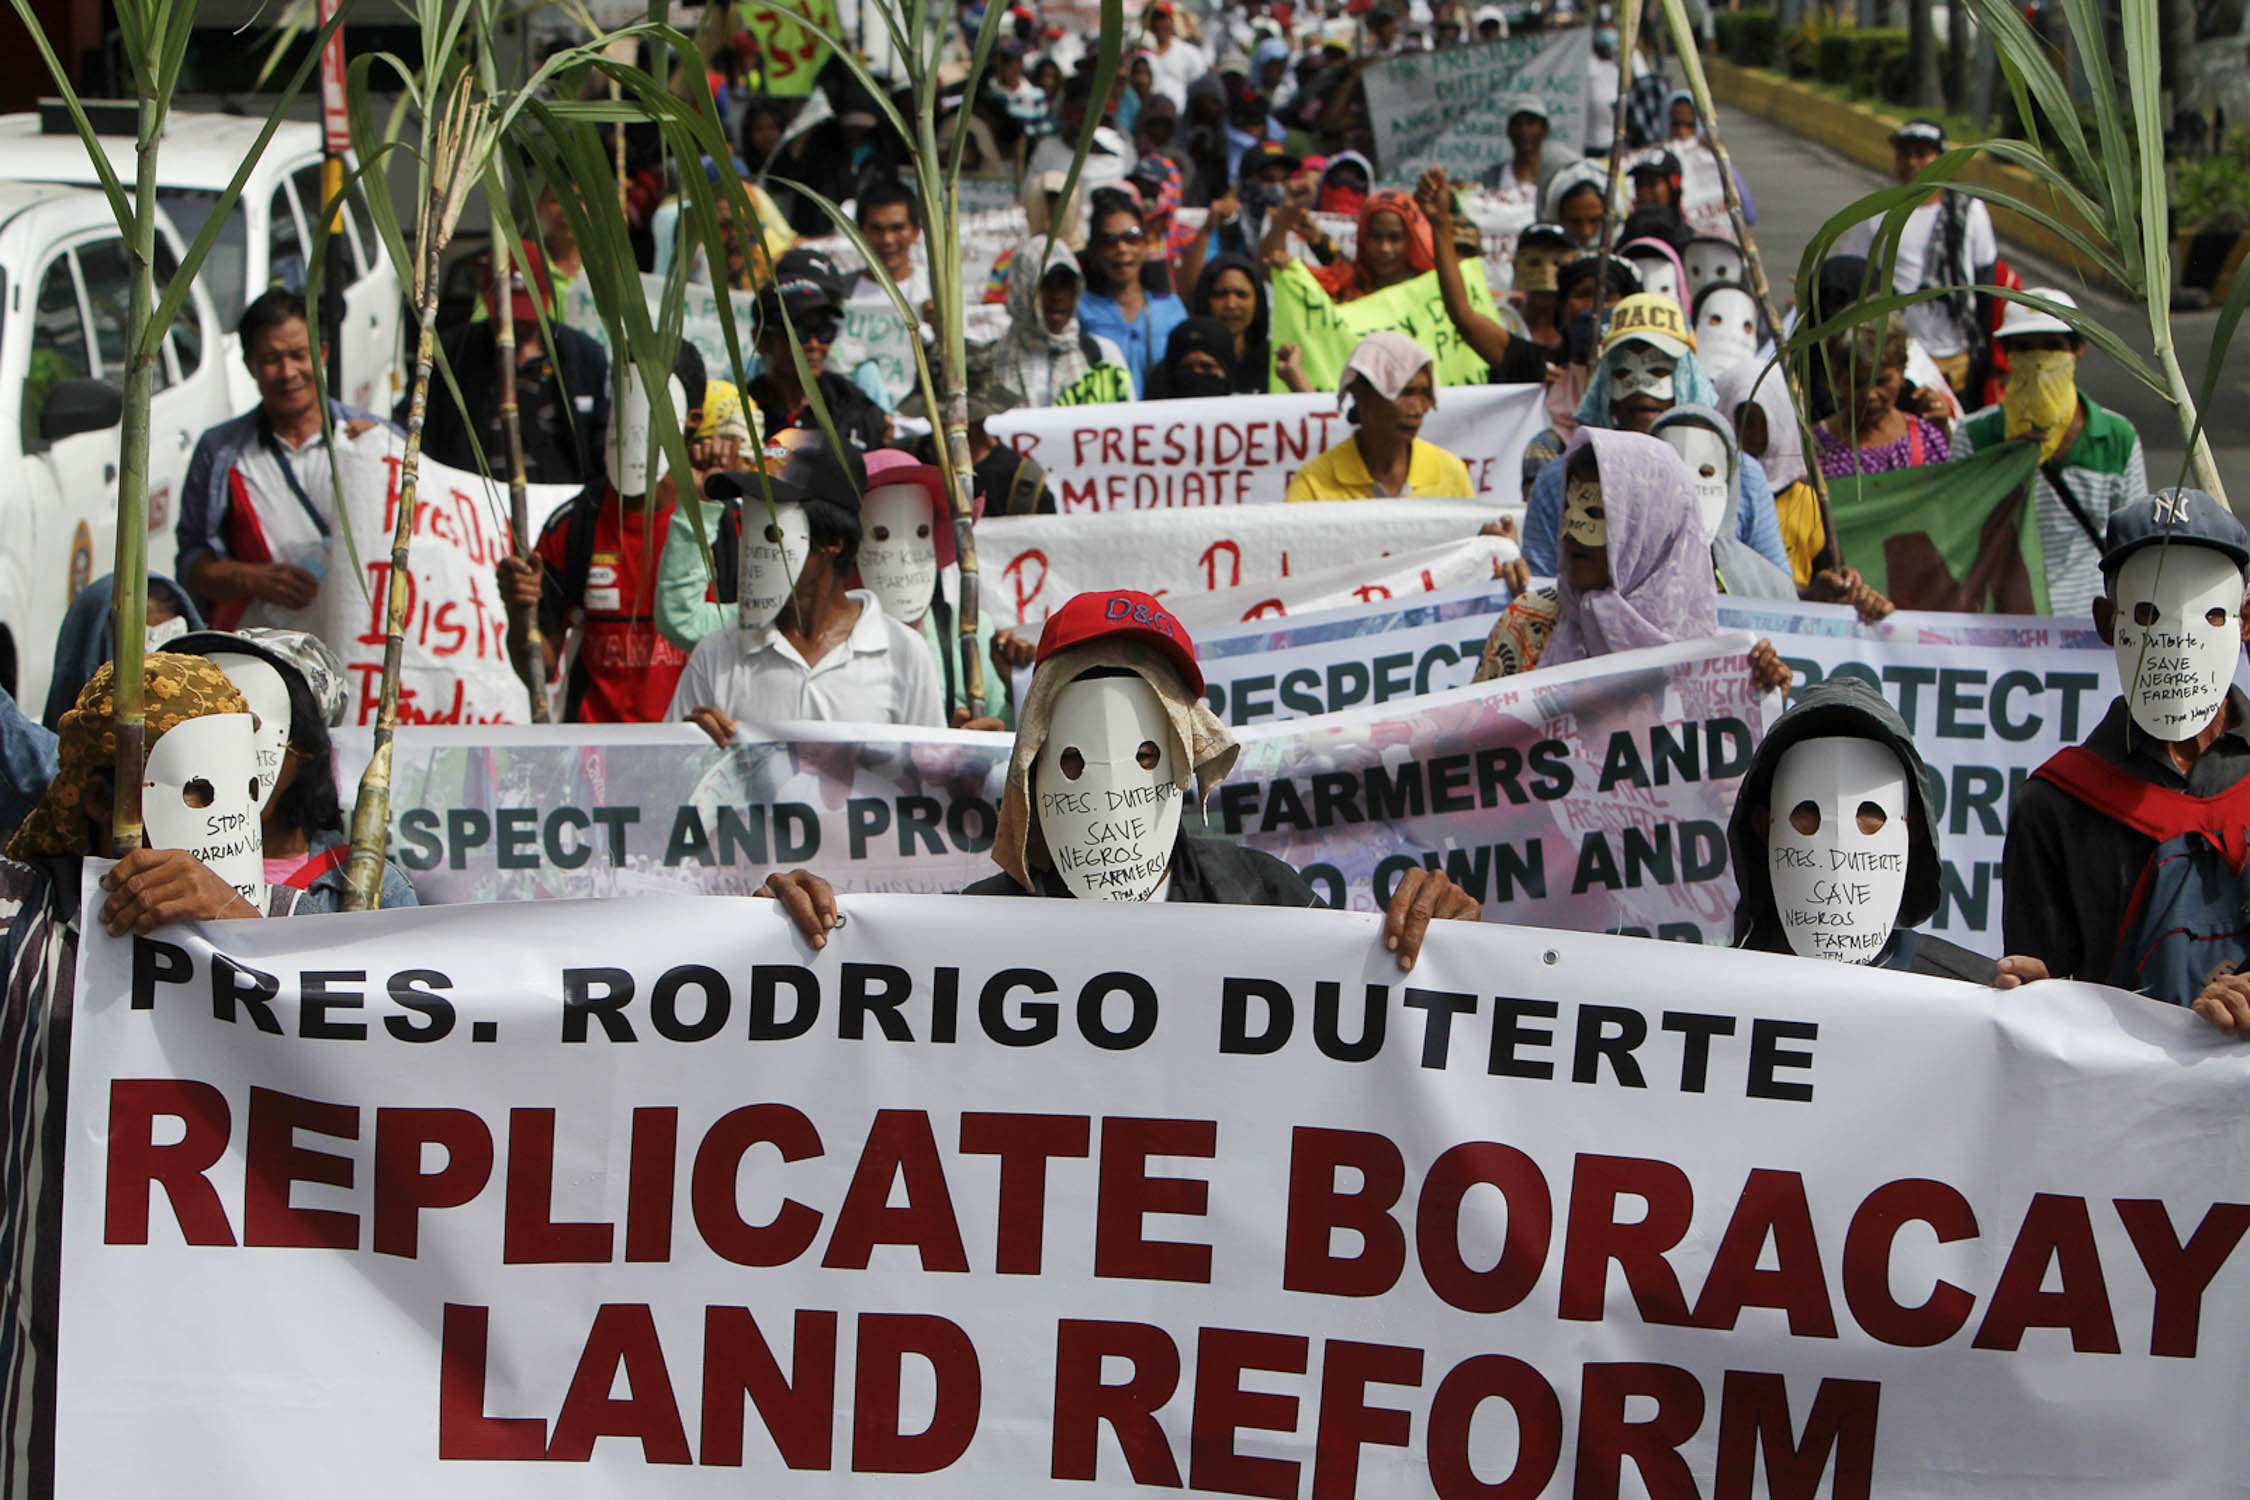 Fulfill land reform vow in Negros, Duterte asked